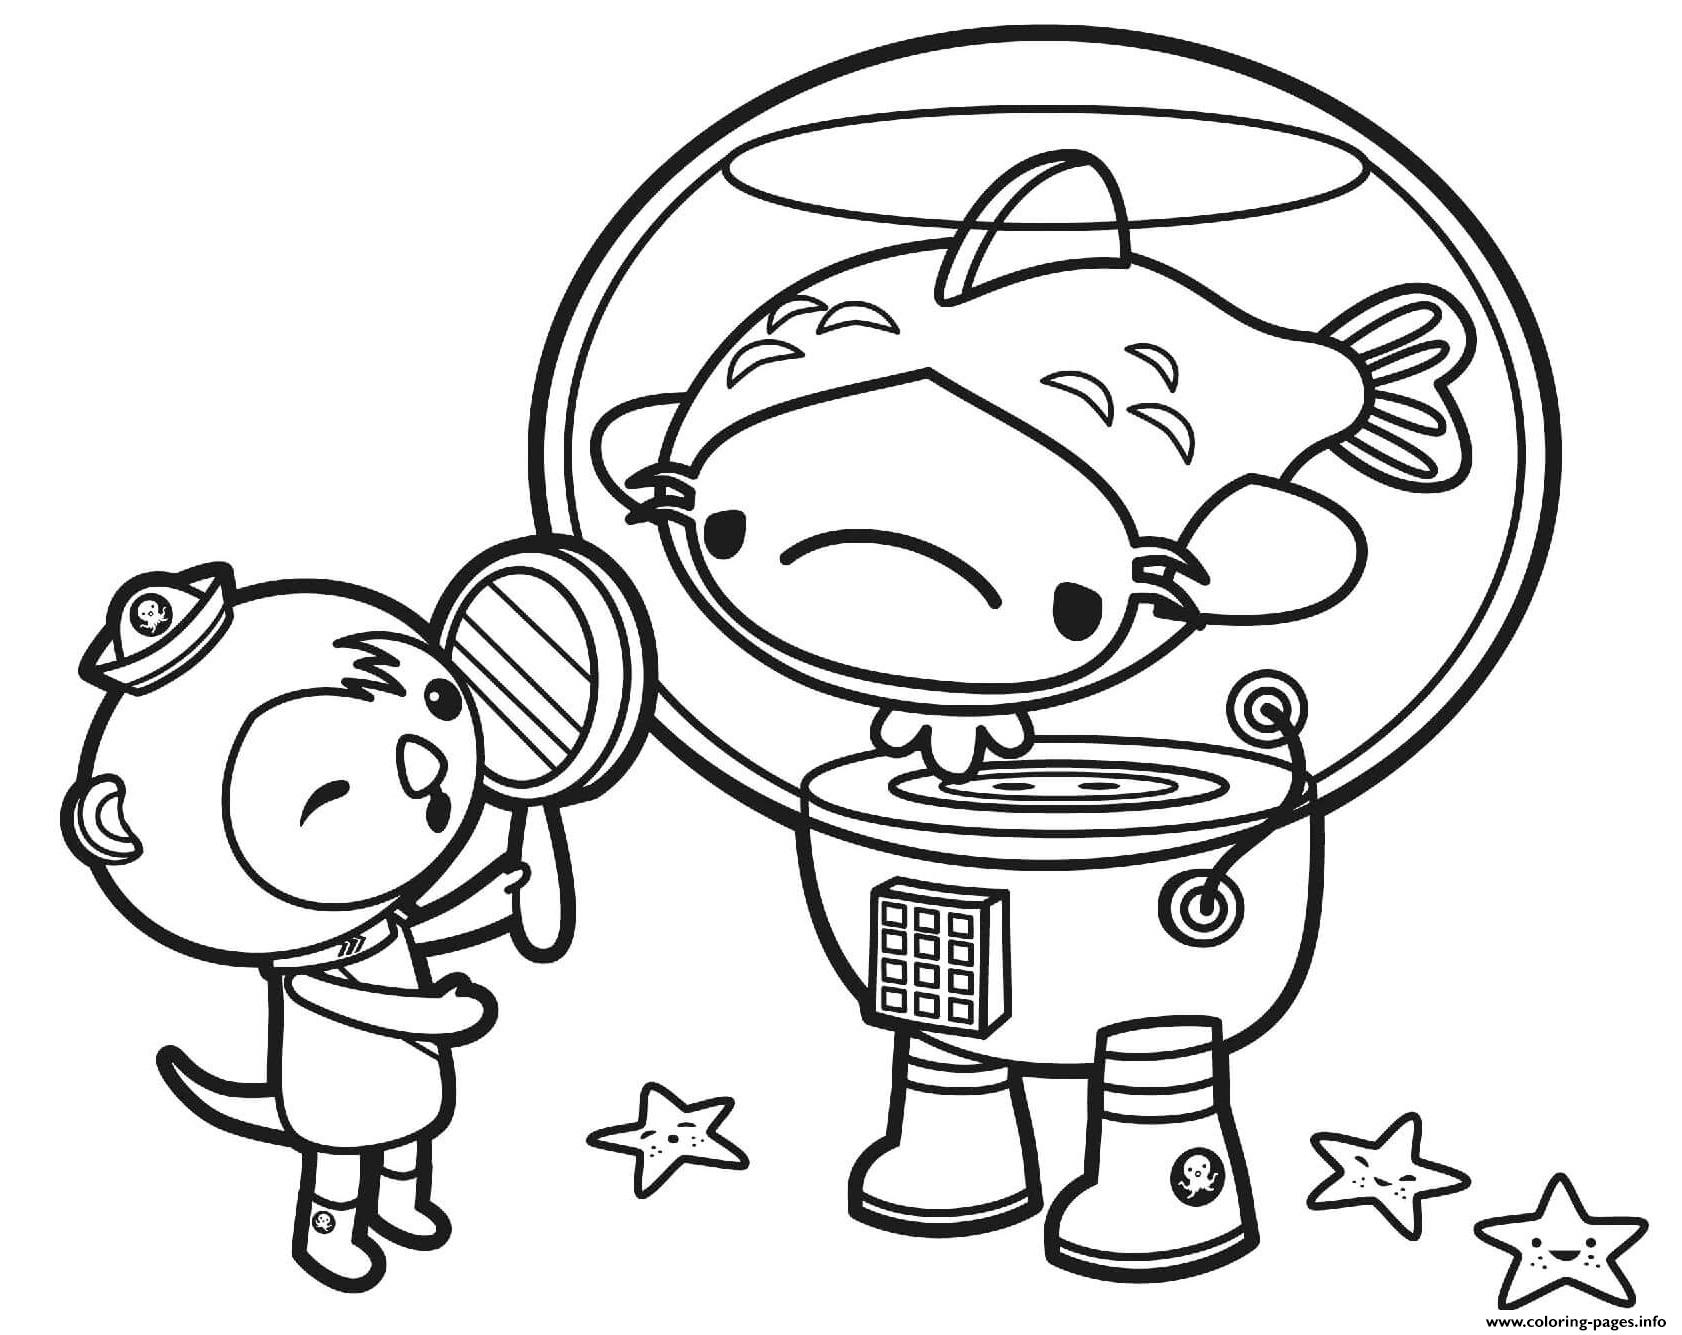 Meet The Frown Fish Octonauts coloring